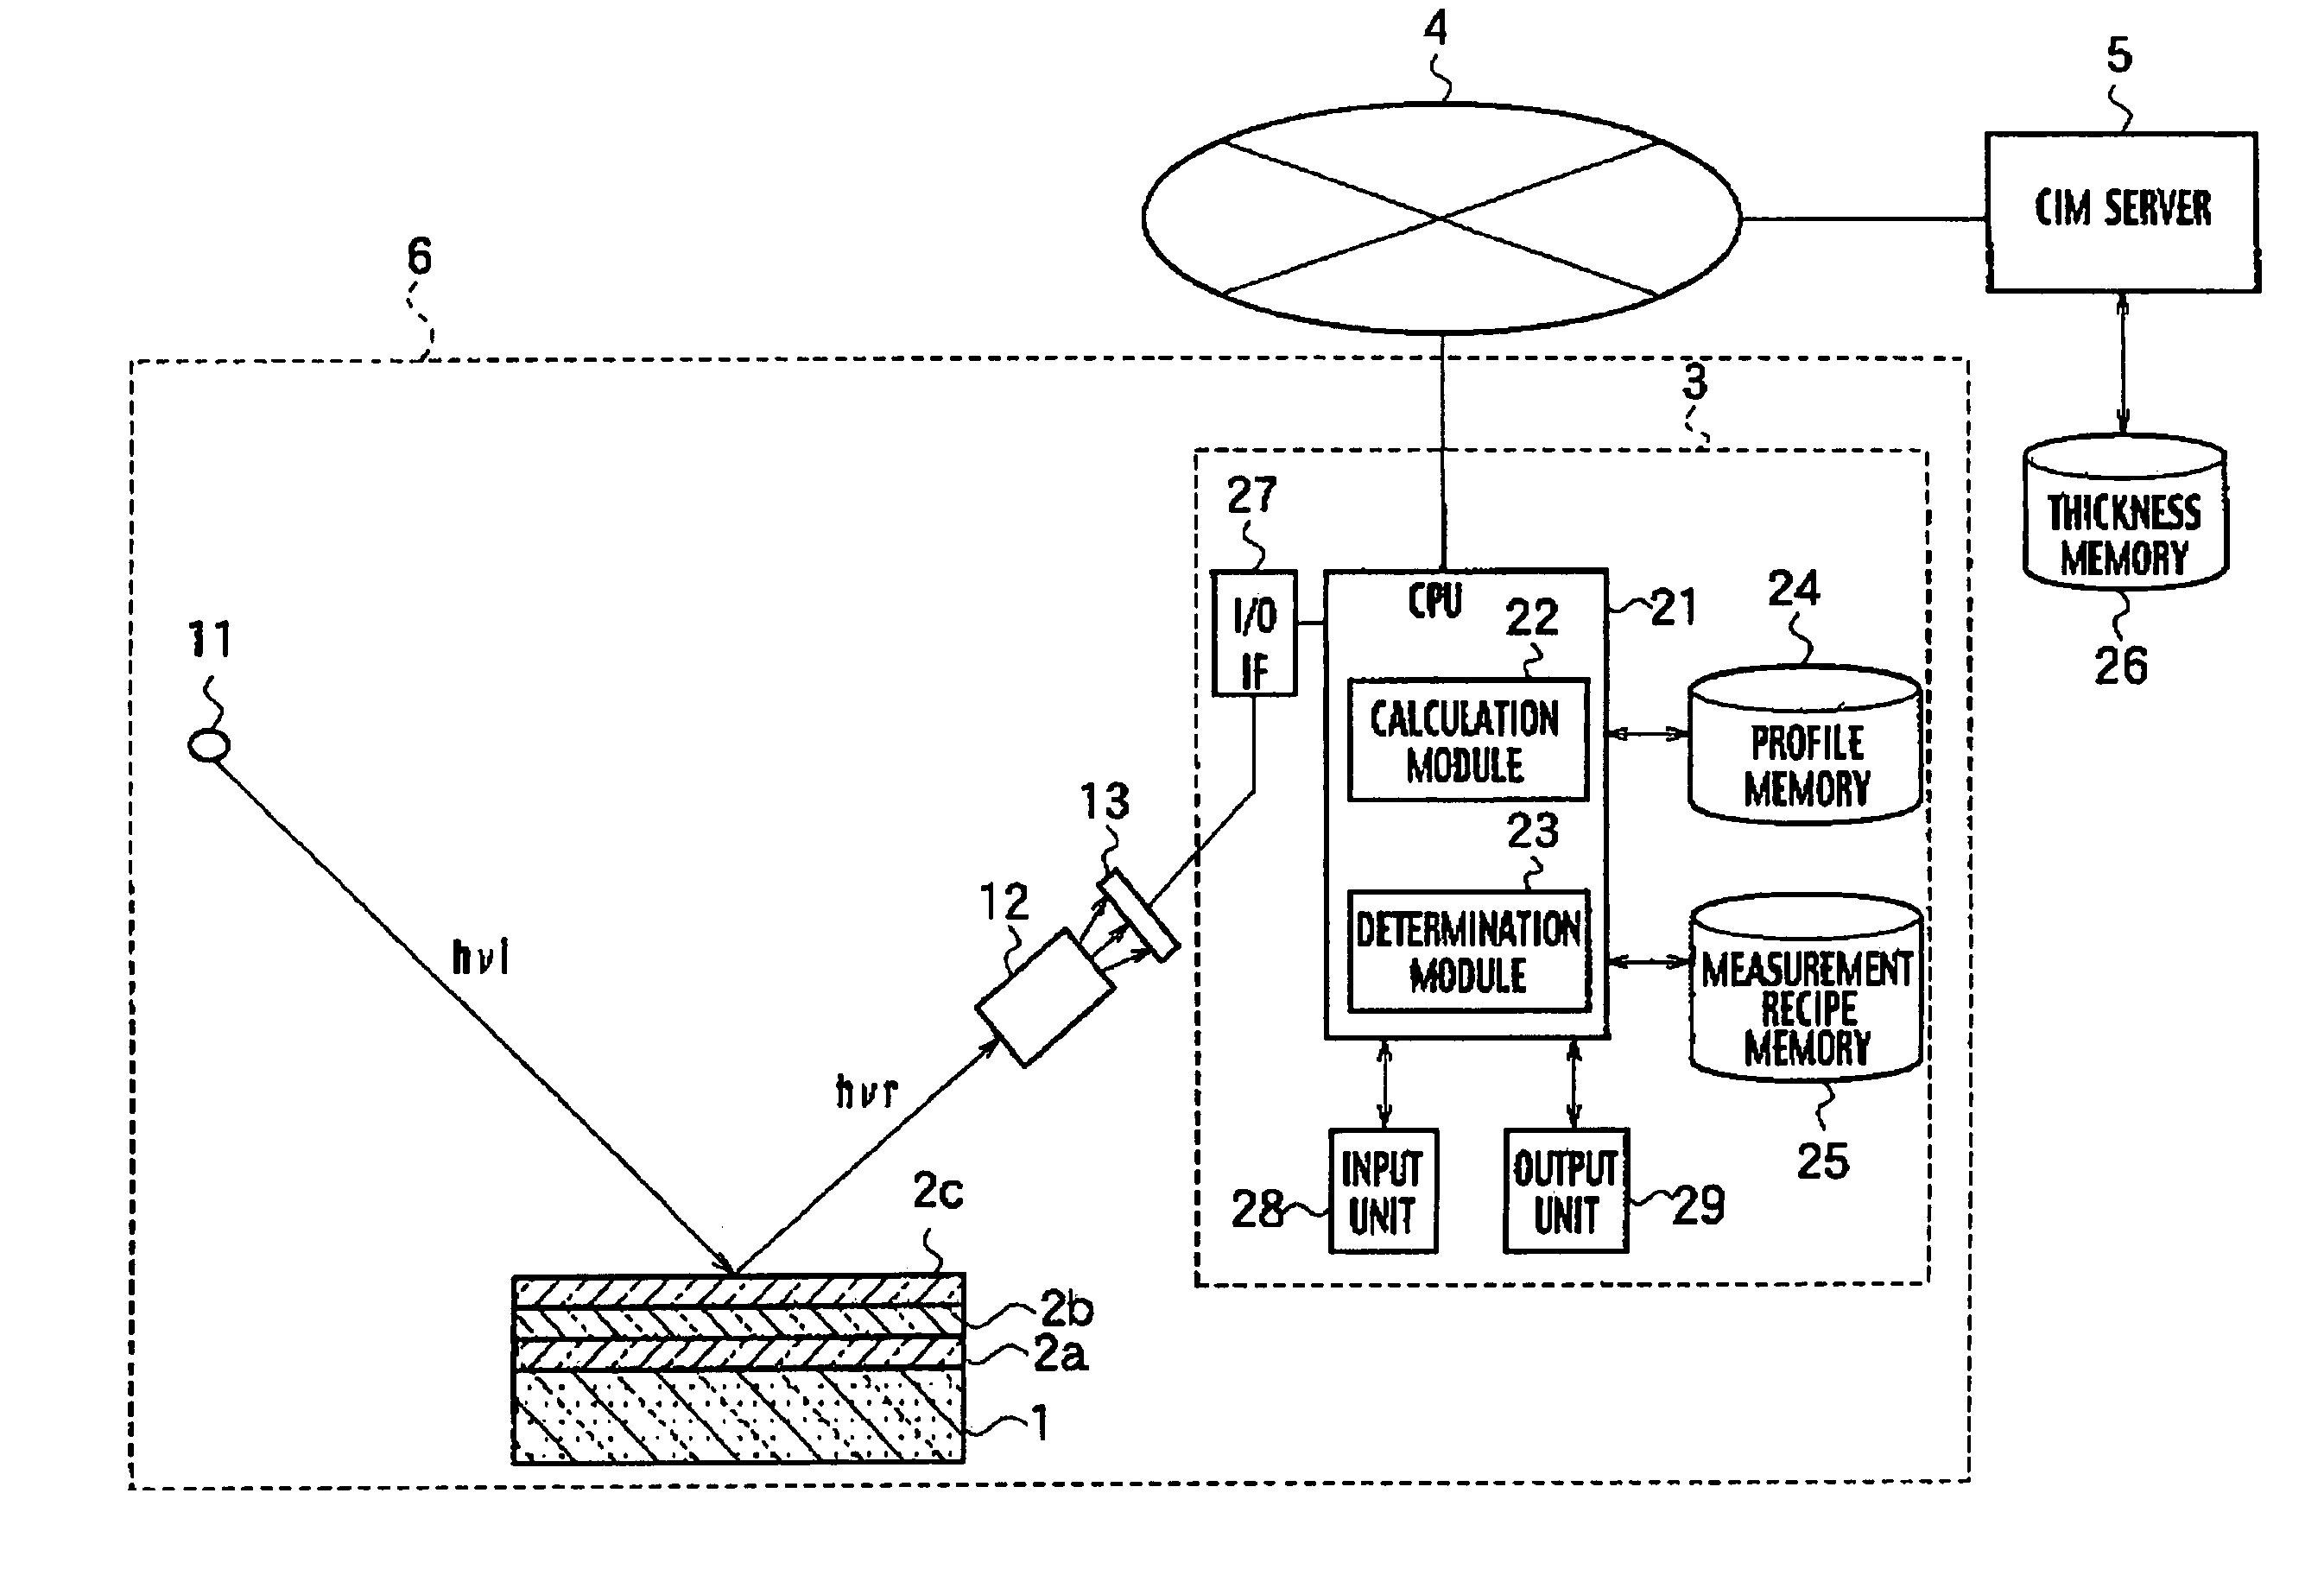 Method for monitoring film thickness, a system for monitoring film thickness, a method for manufacturing a semiconductor device, and a program product for controlling film thickness monitoring system